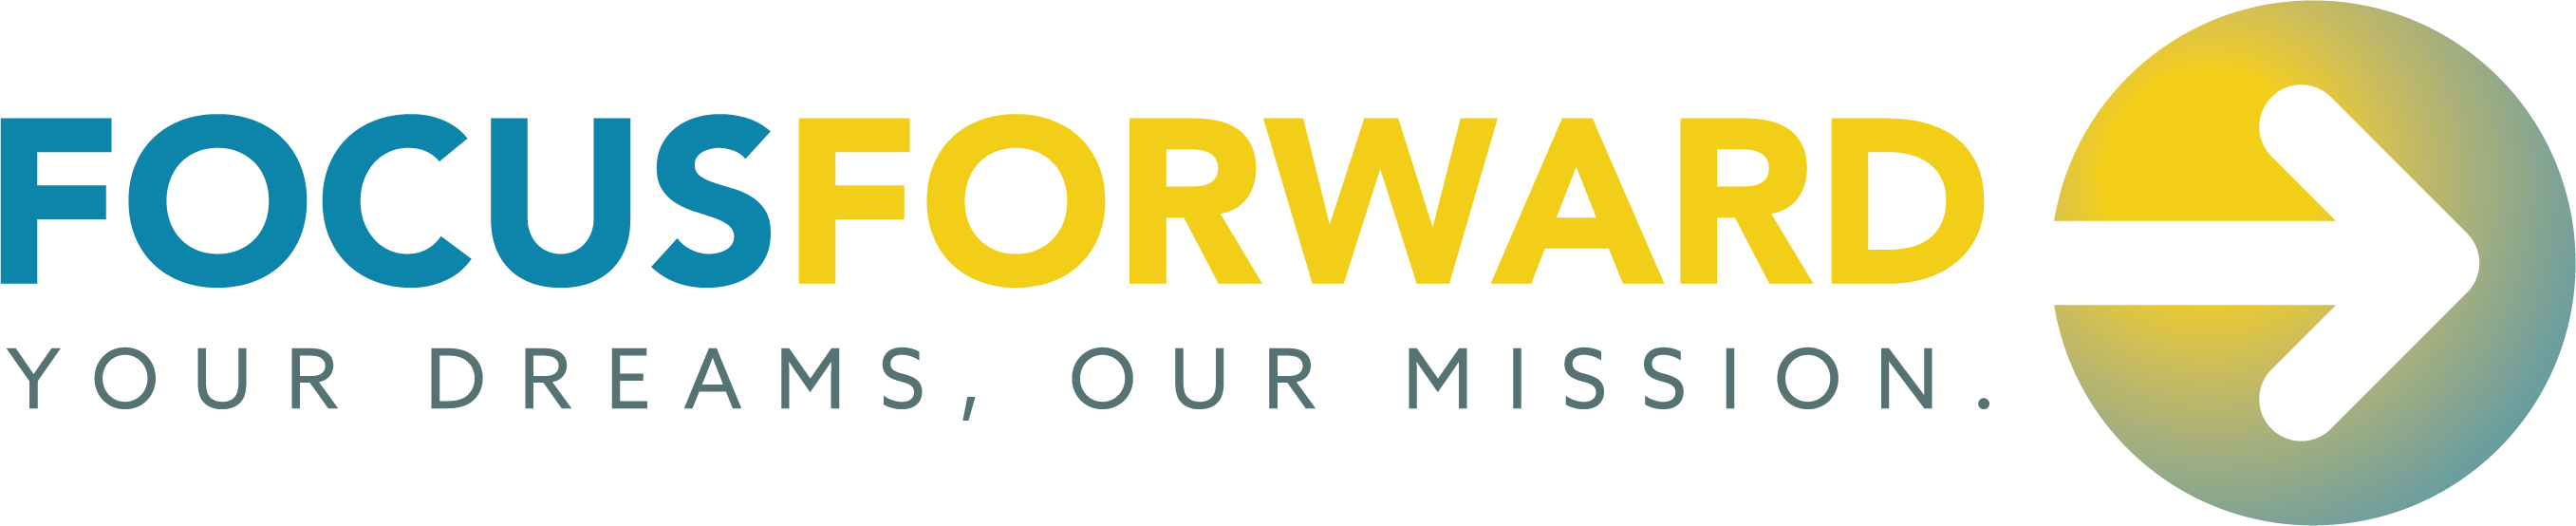 FocusForward_ApprovedLogo__Color.png